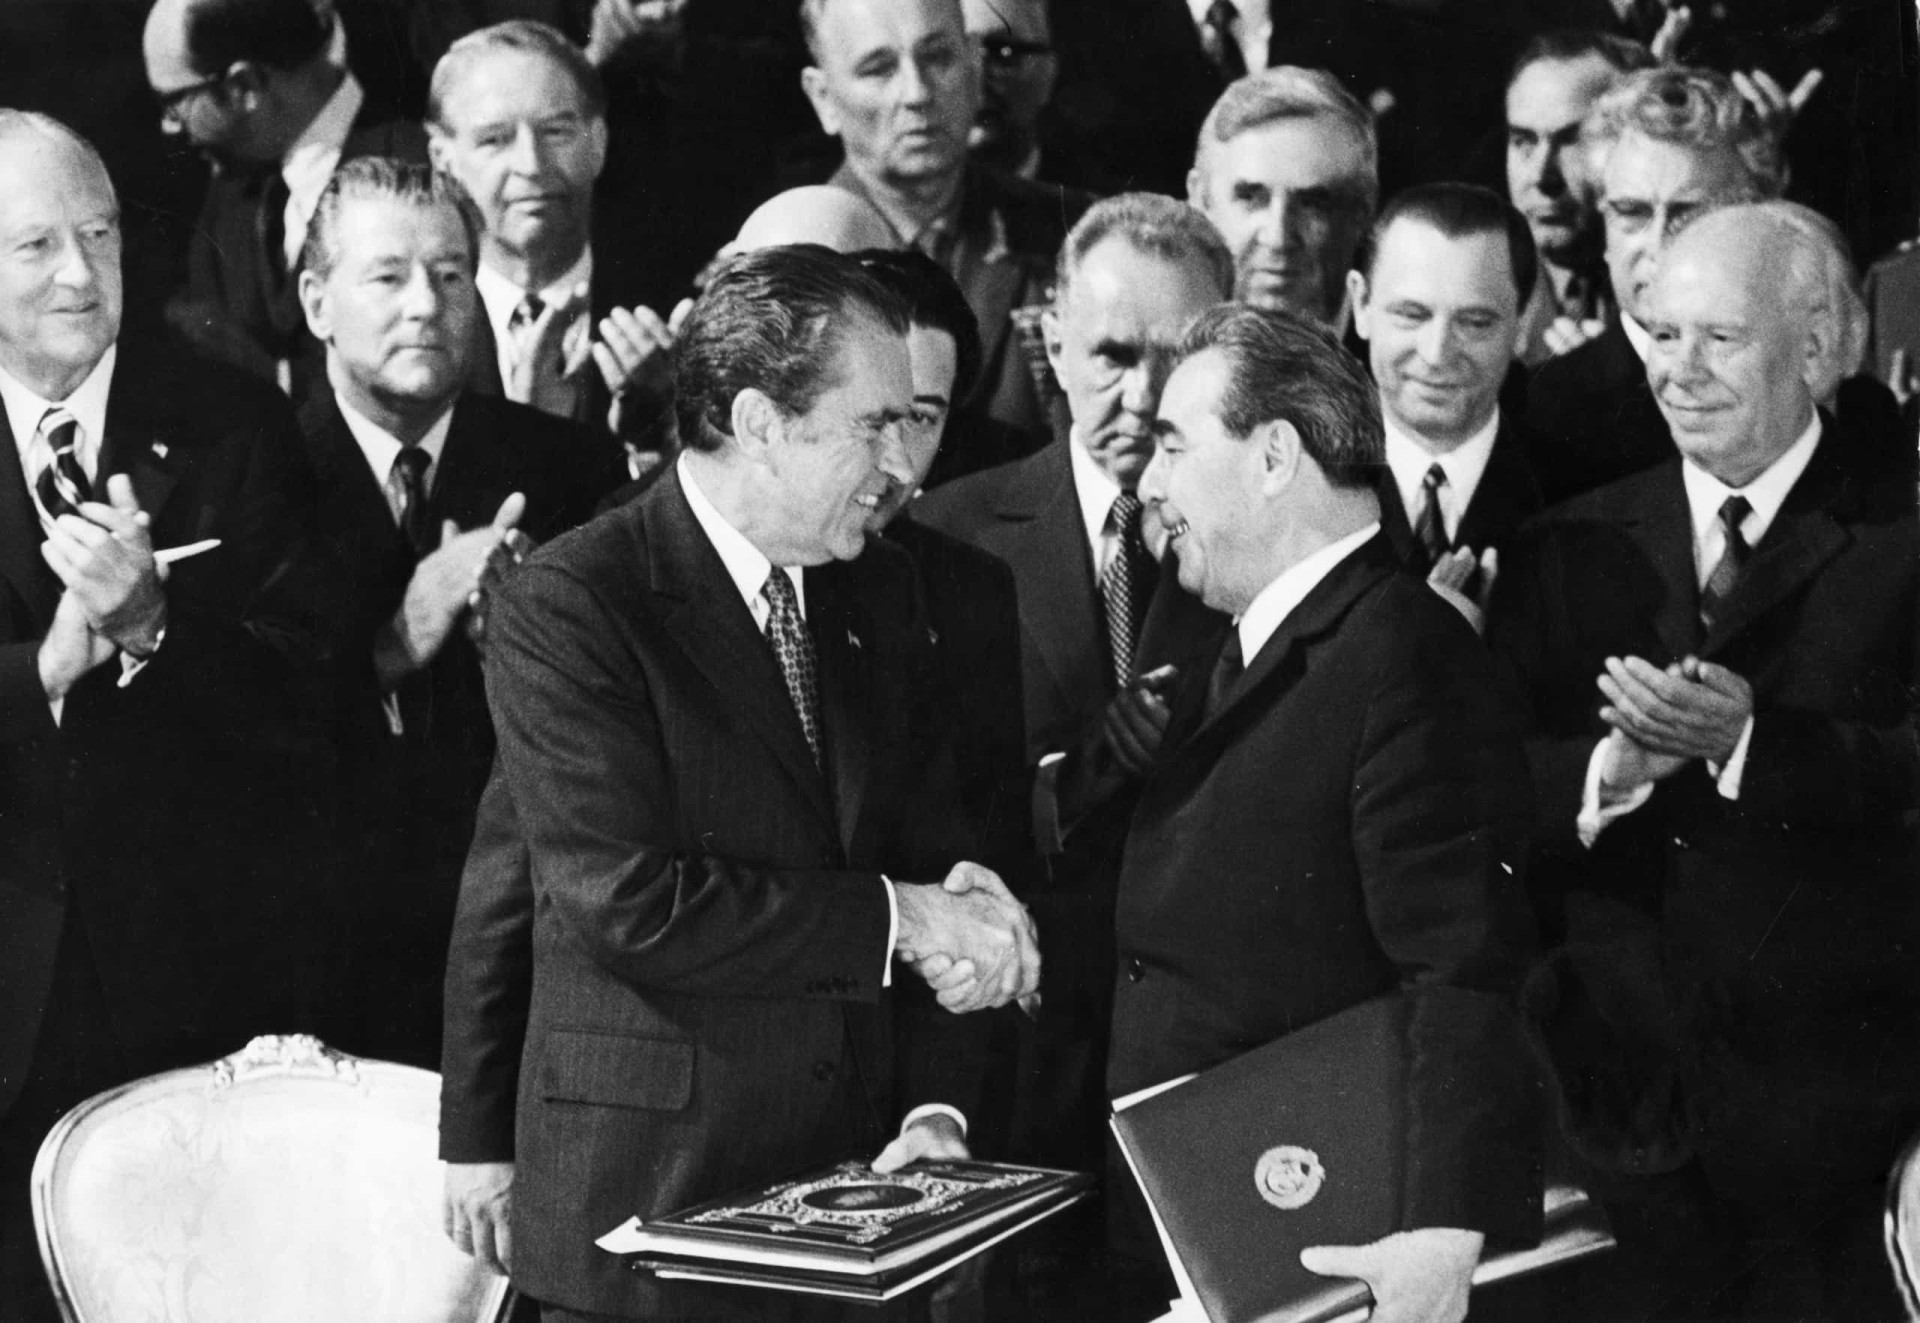 <p>A wave of renewed optimism sweeps the world as the United States and the Soviet Union sign the first Strategic Arms Limitation Treaty (SALT I) and the Anti-Ballistic Missile (ABM) Treaty. The clock drops back 120 seconds to 12 minutes before midnight as Richard Nixon and Leonid Brezhnev close the deal in Moscow.</p><p><a href="https://www.msn.com/en-ca/community/channel/vid-7xx8mnucu55yw63we9va2gwr7uihbxwc68fxqp25x6tg4ftibpra?cvid=94631541bc0f4f89bfd59158d696ad7e">Follow us and access great exclusive content every day</a></p>